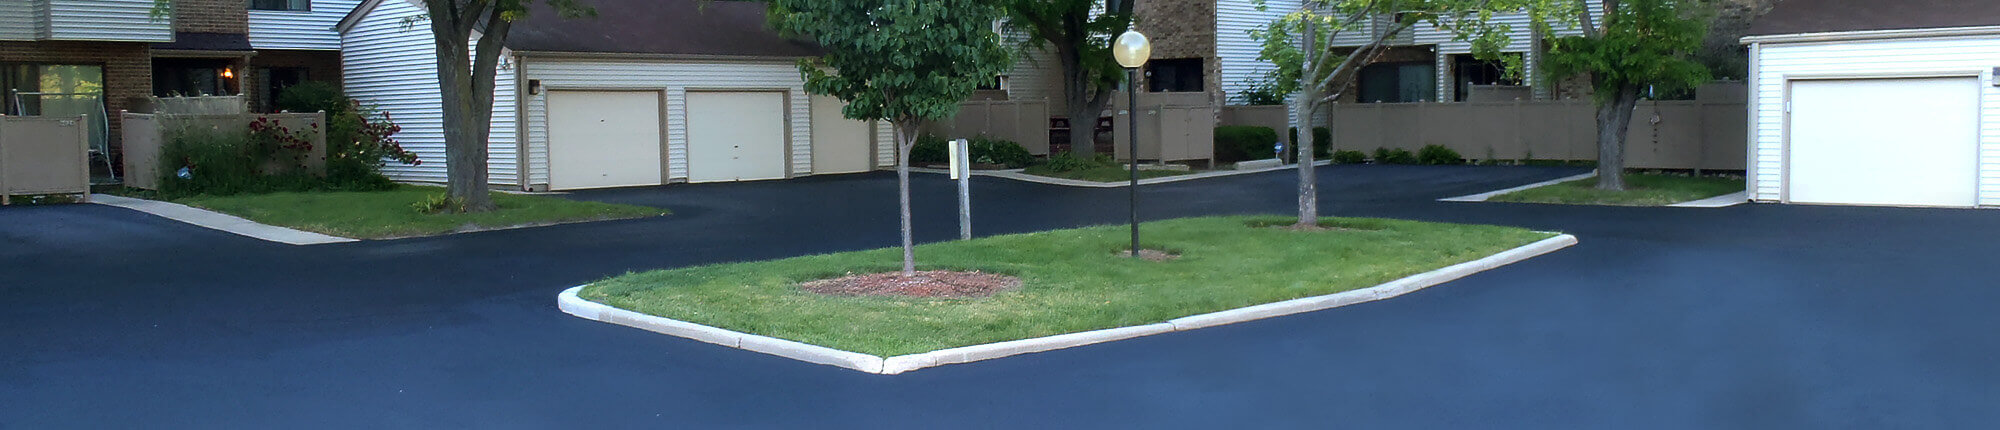 Residential area asphalt pouring and repair